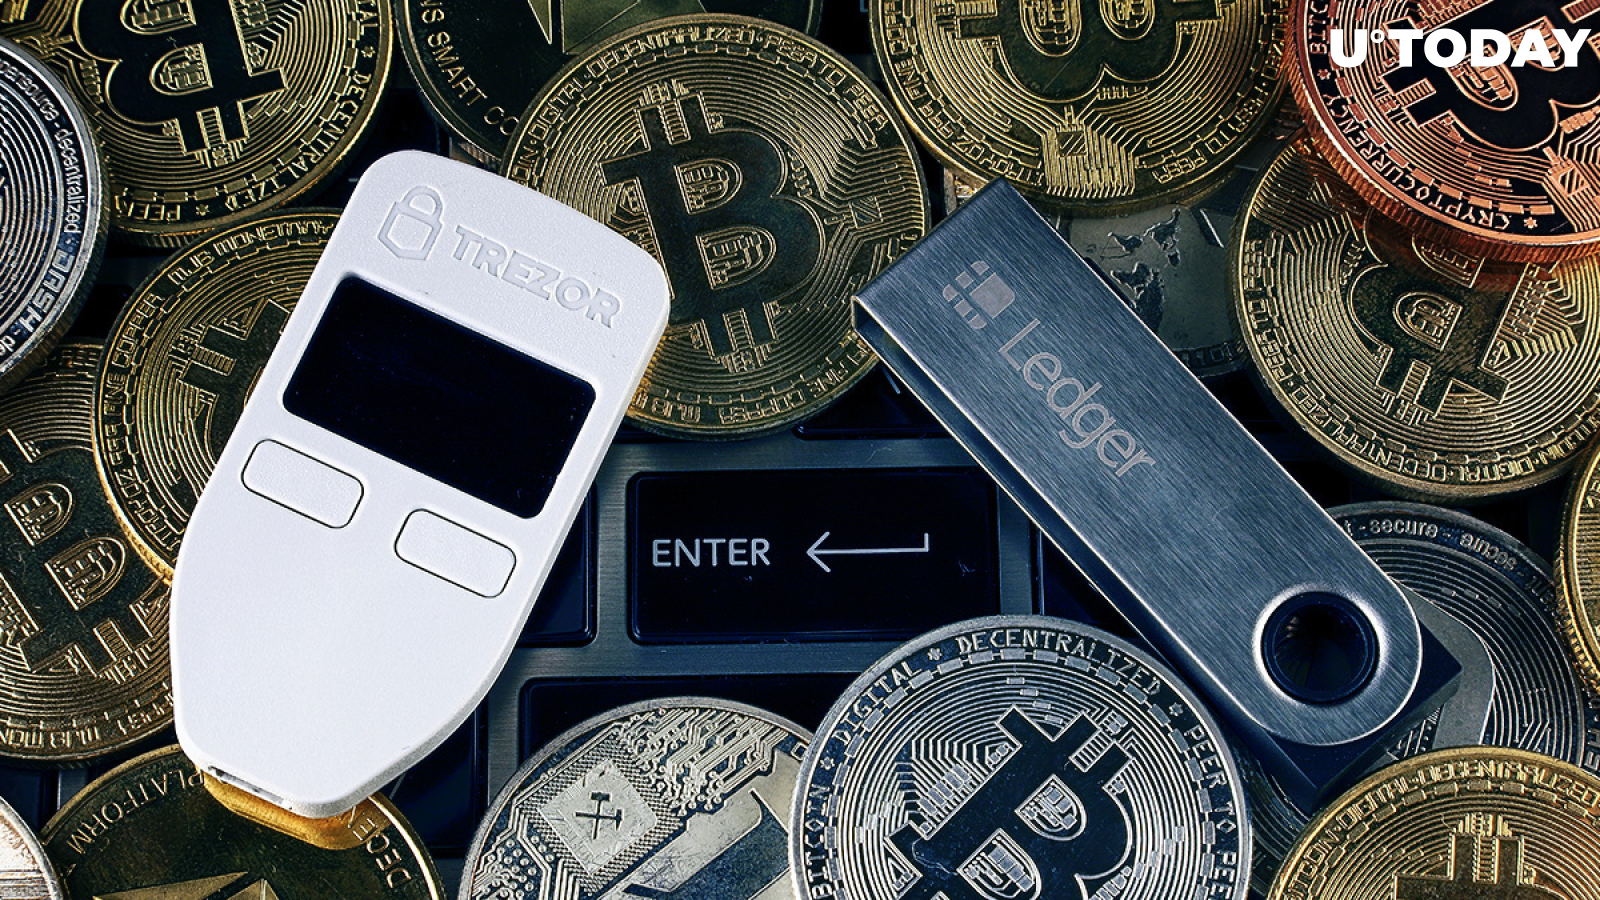 Trezor Customers Targeted with Phishing Scam